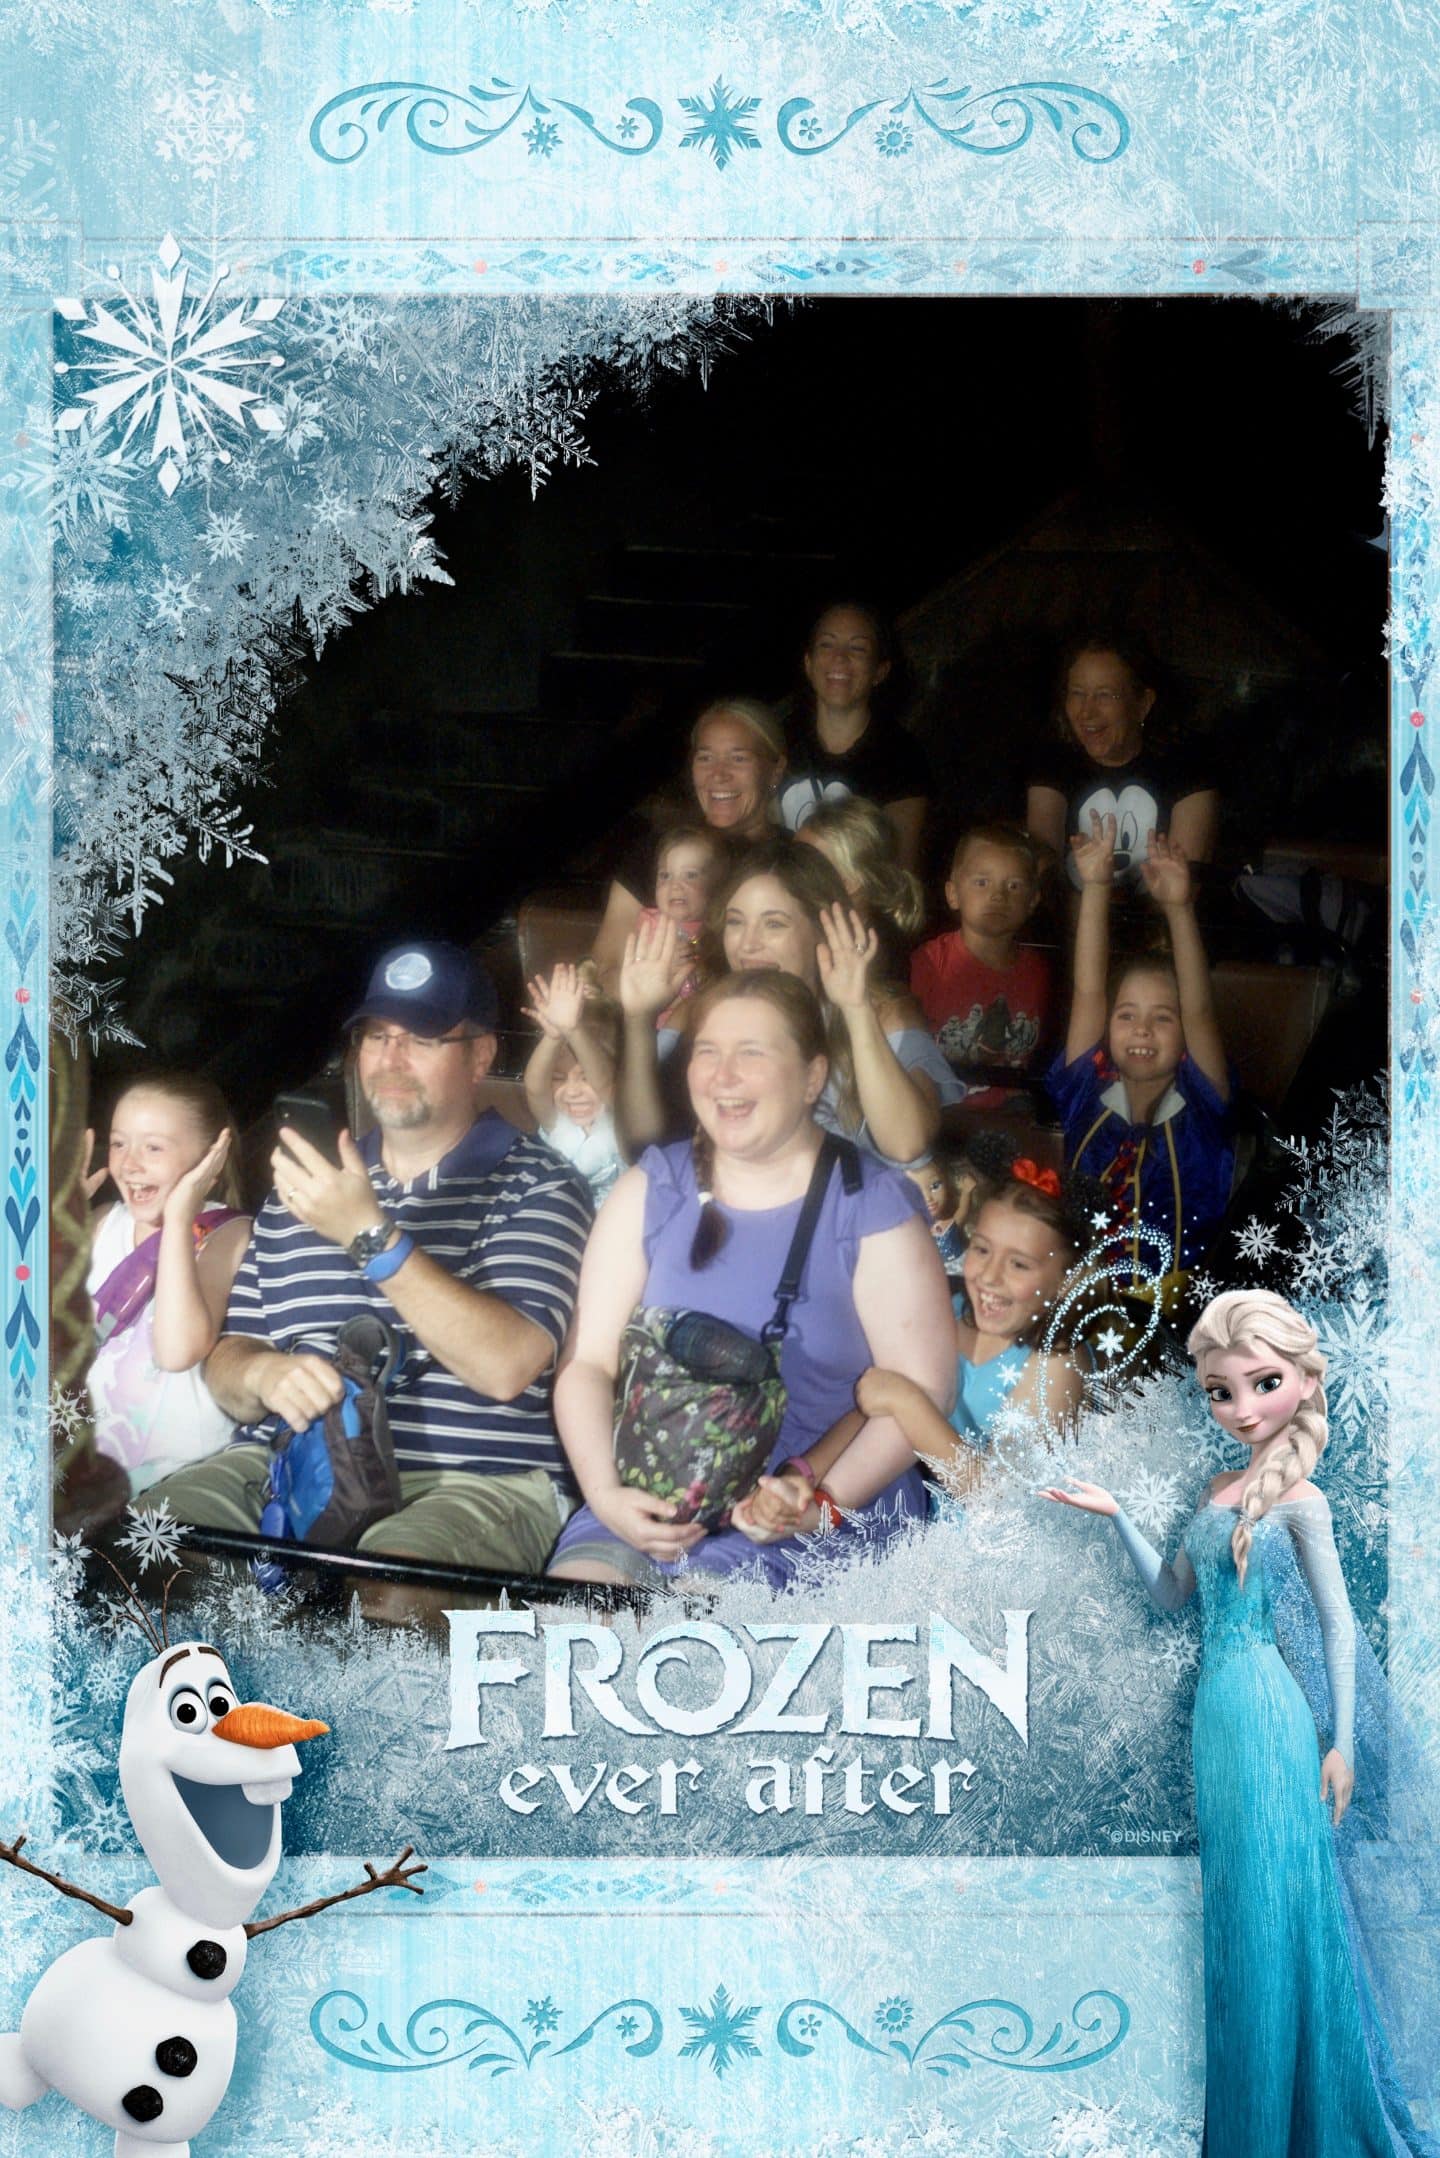 frozen ever after at Epcot